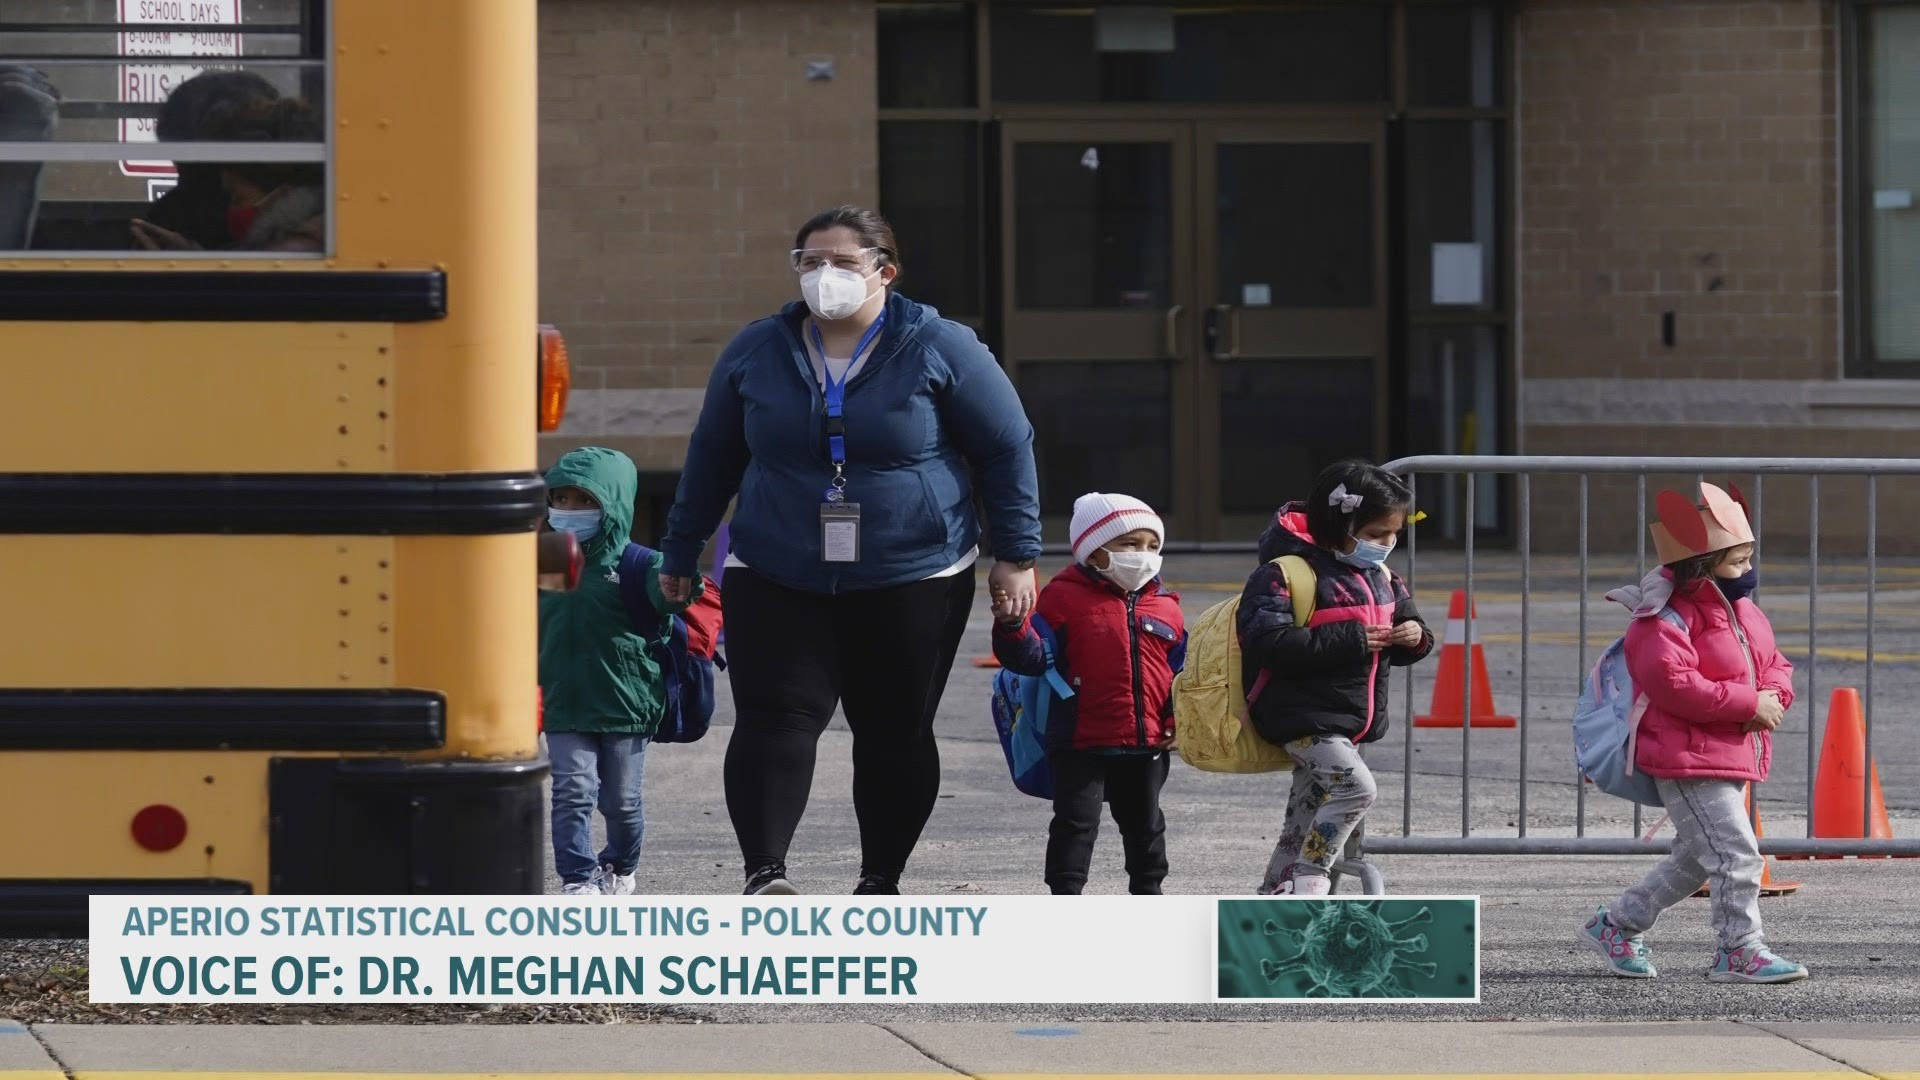 Public health officials said cases among school staff and students are similar to levels the county saw during the November surge, but quarantine levels are steady.